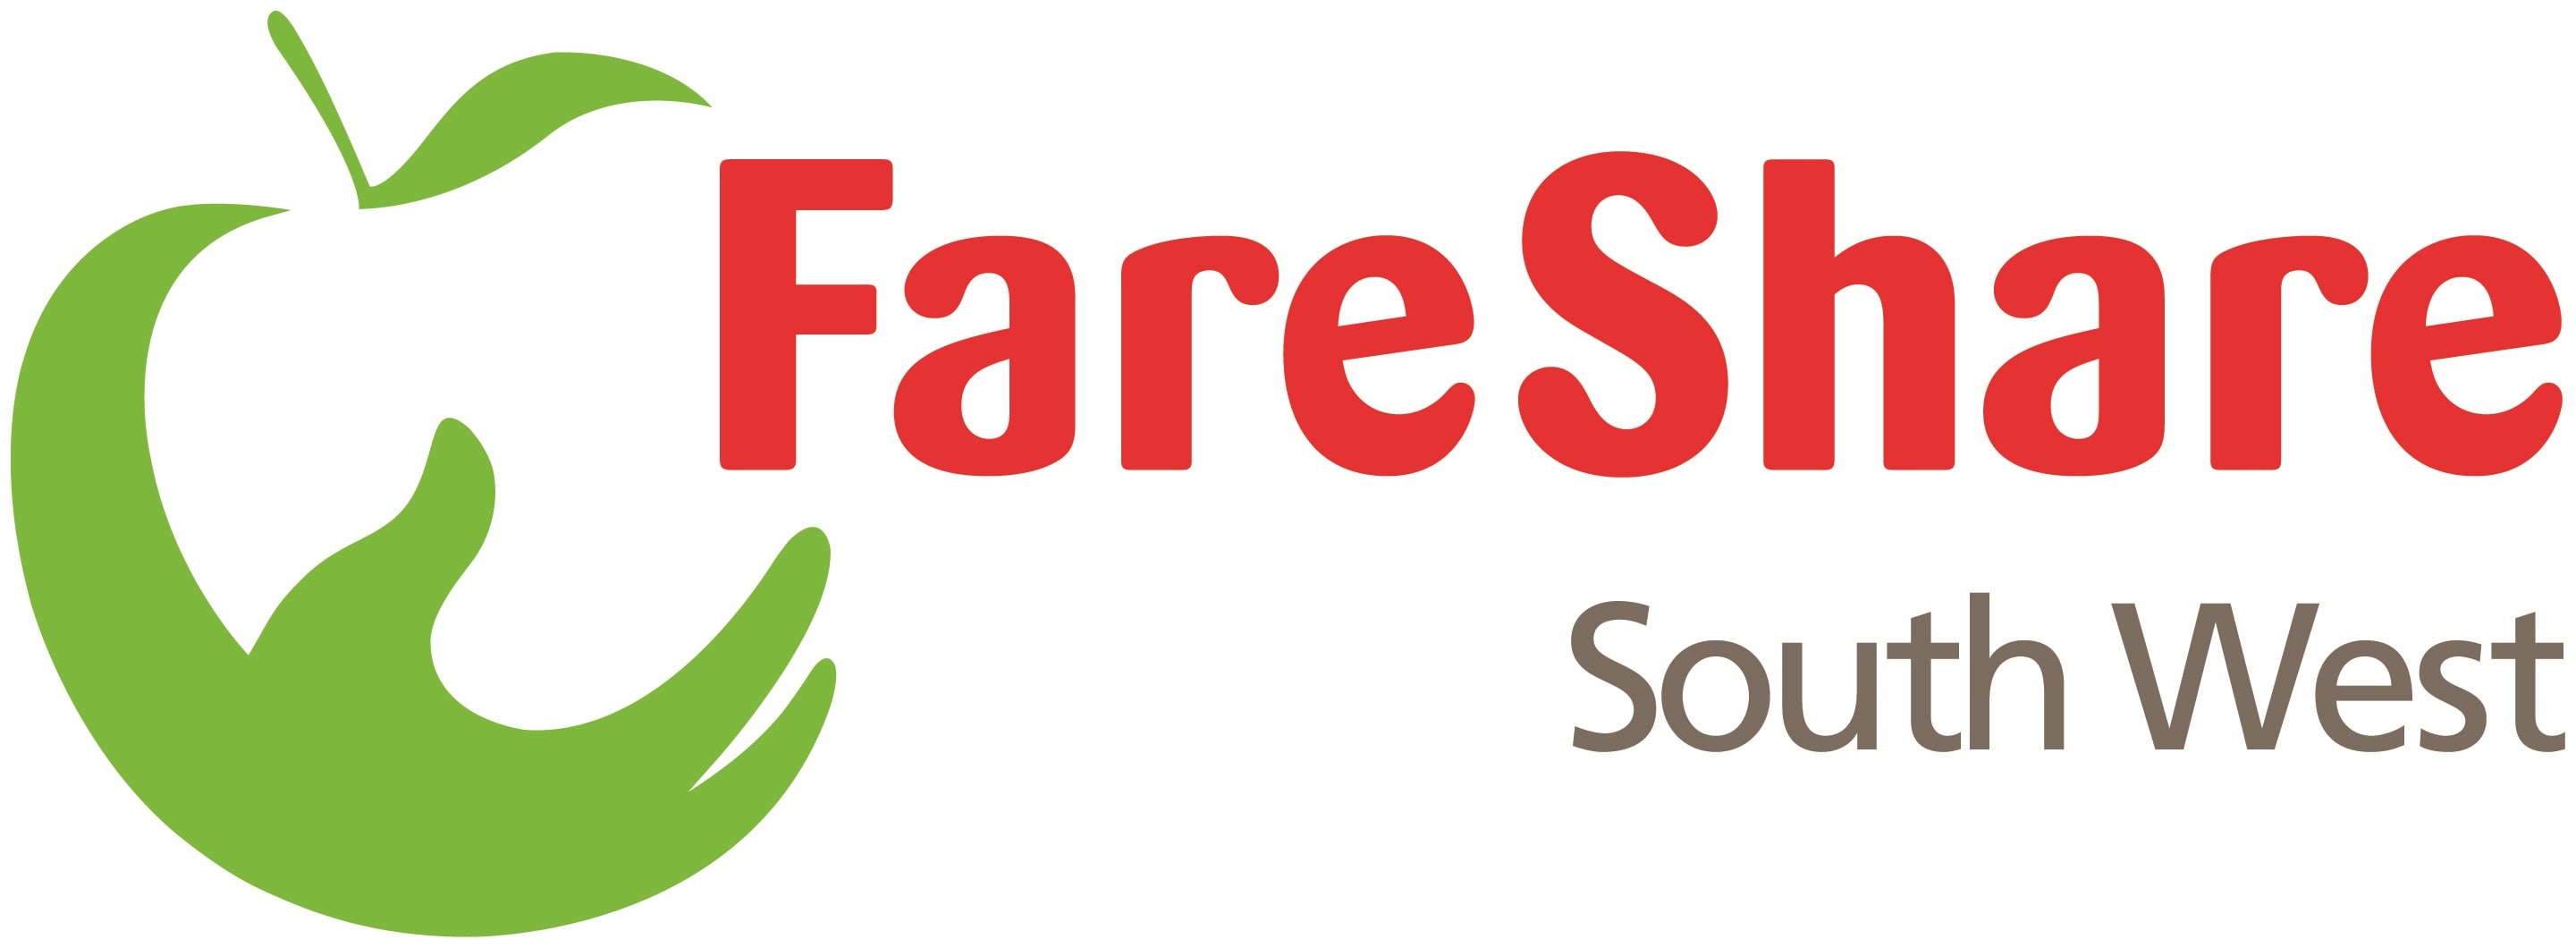 Community Initiatives South West Limited - FareShare South West